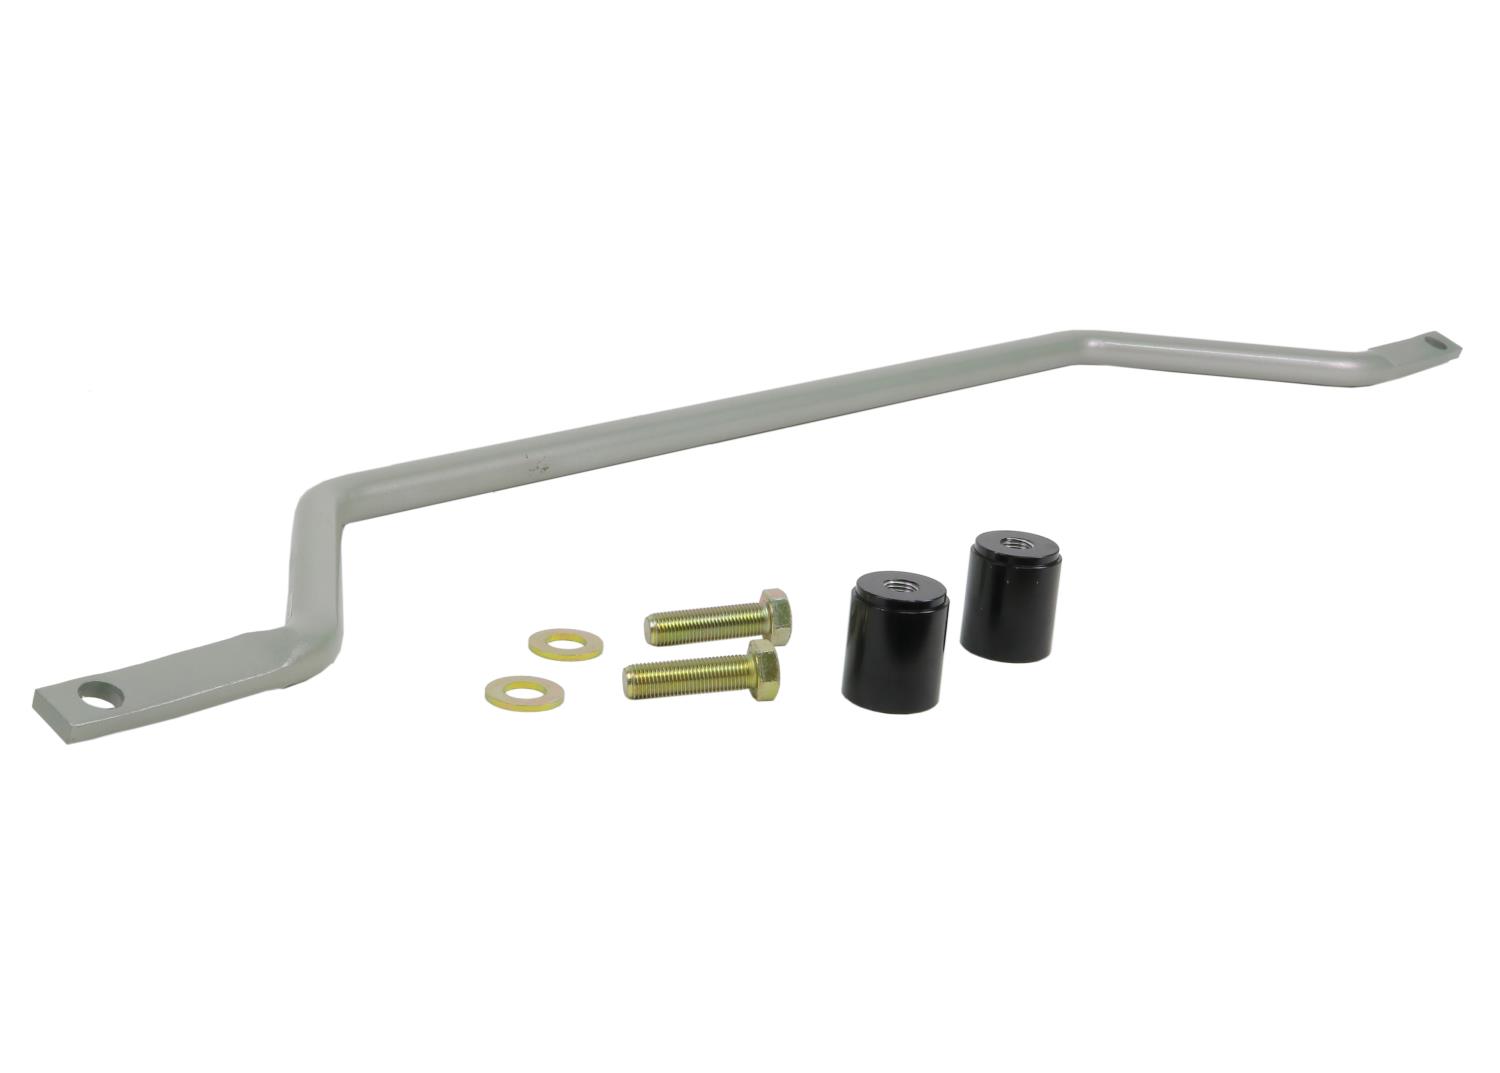 BHR93 Rear 22 mm Heavy Duty Fixed Sway Bar for 2011+ Chevy Volt EV, 2012+ Chevy Cruze JH